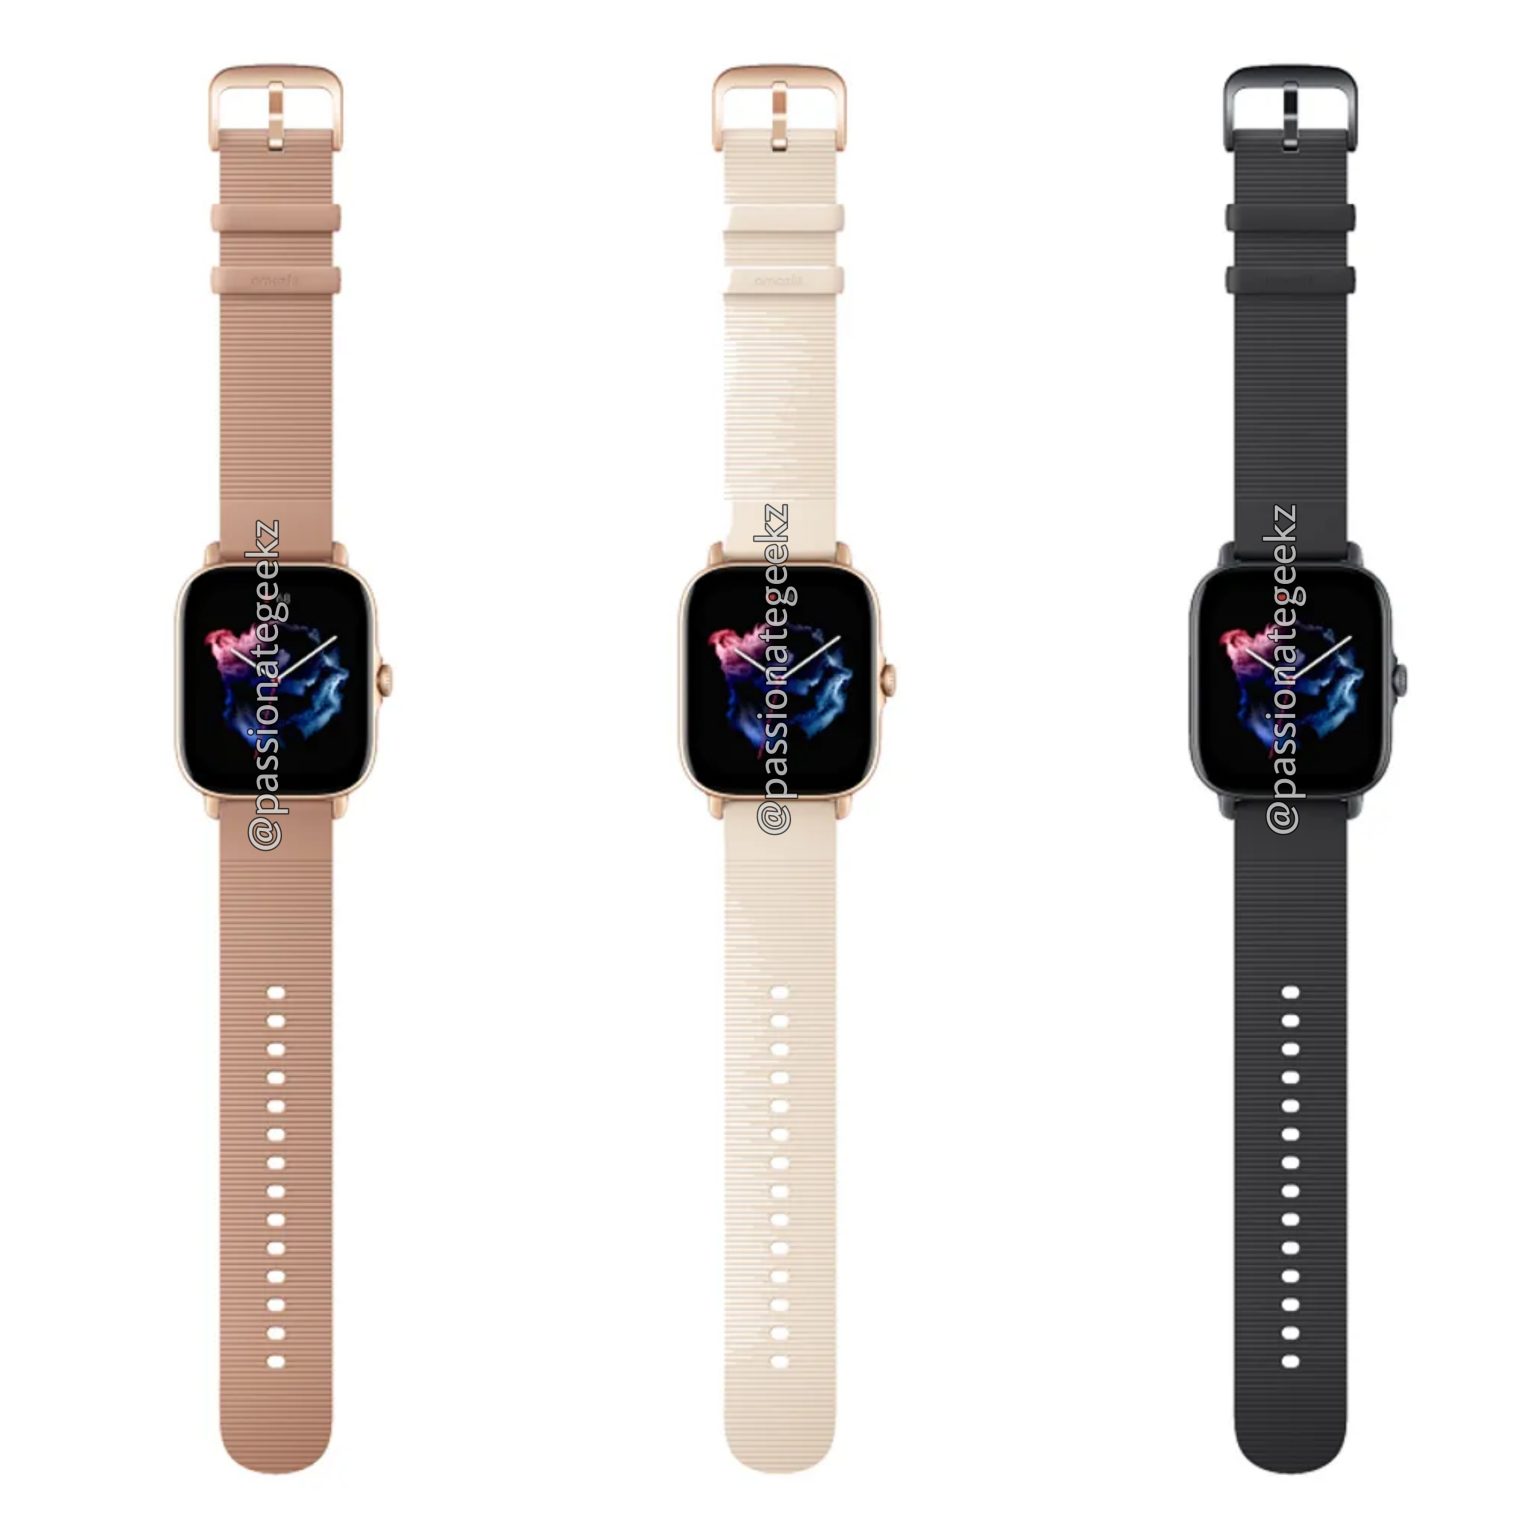 Amazfit GTR 3 Pro, GTR 3 and GTS 3 unveiled with improved displays, battery  life and new features -  news